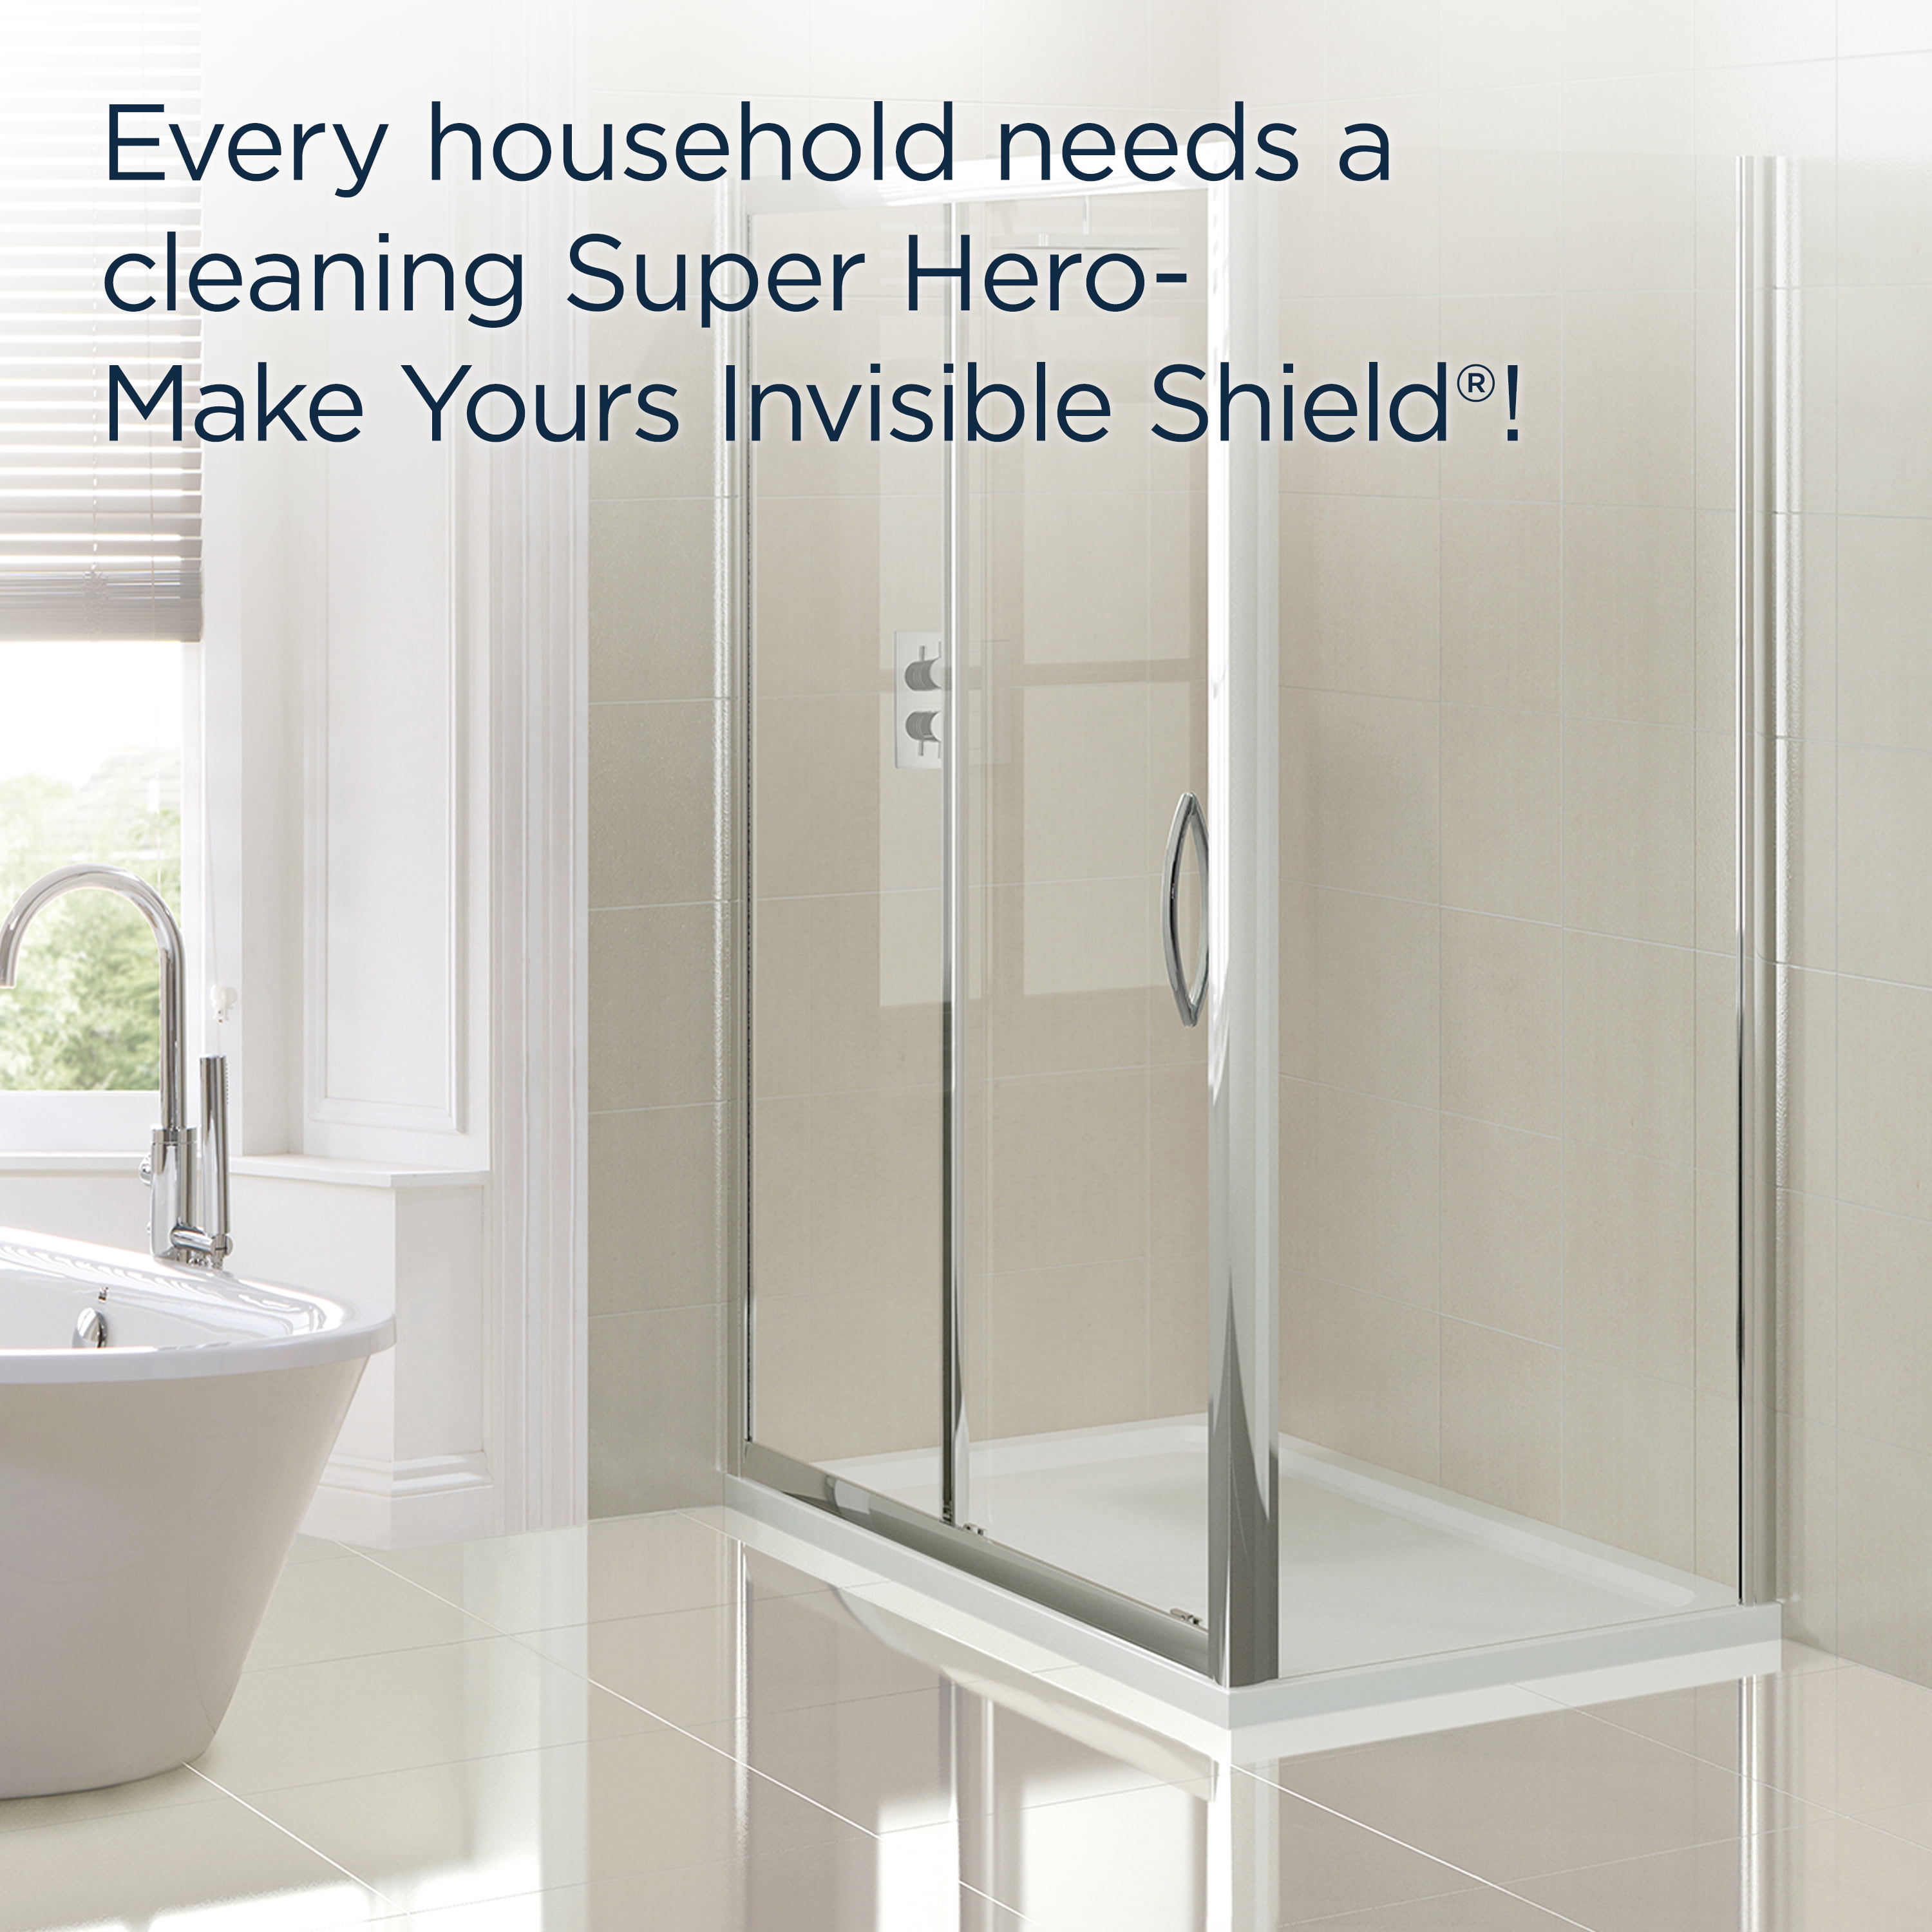 Invisible Shield Tub and Shower Glass Restoration + Protectant